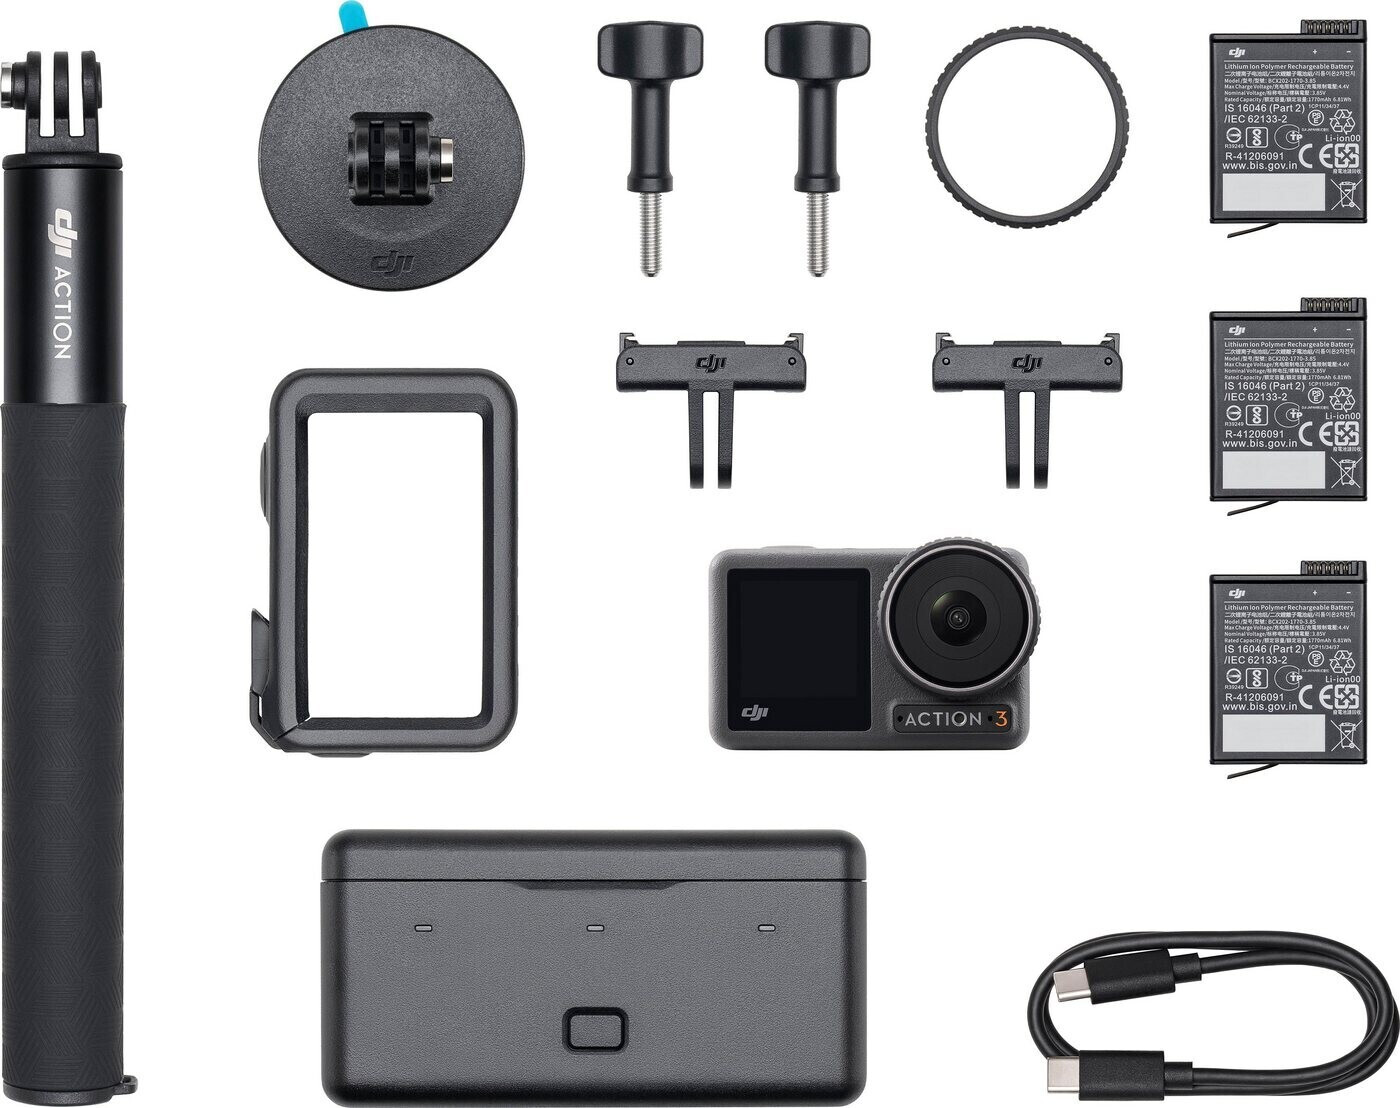 Buy DJI Osmo from Deals Best £209.00 Action on 3 – (Today)